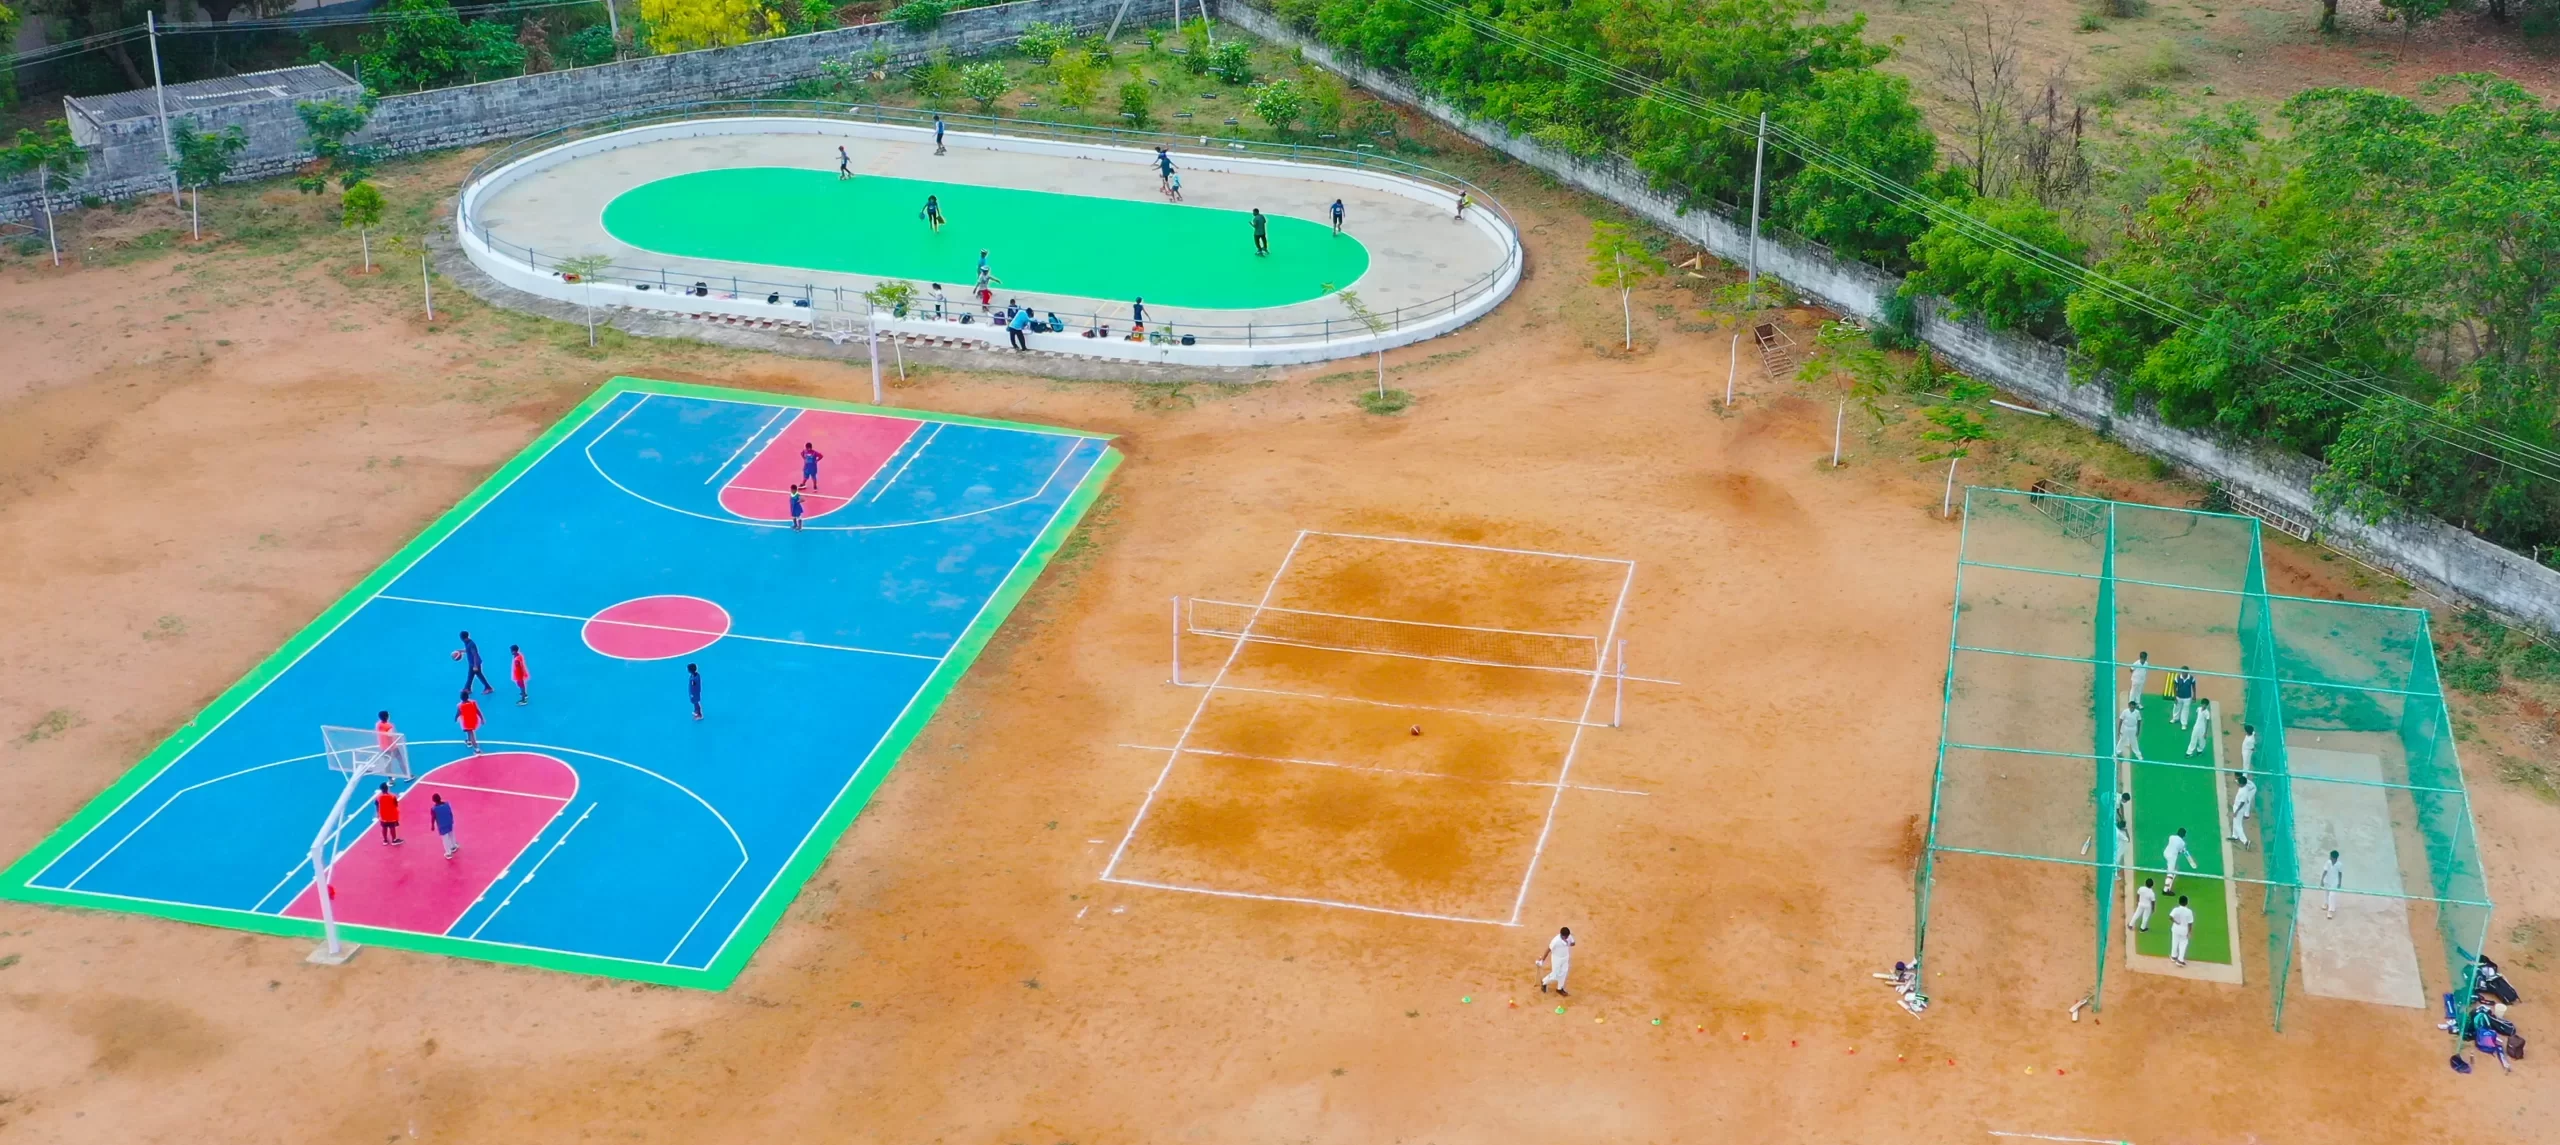 DPS, Warangal students practicing multiple sports such as cricket,basketball and skating